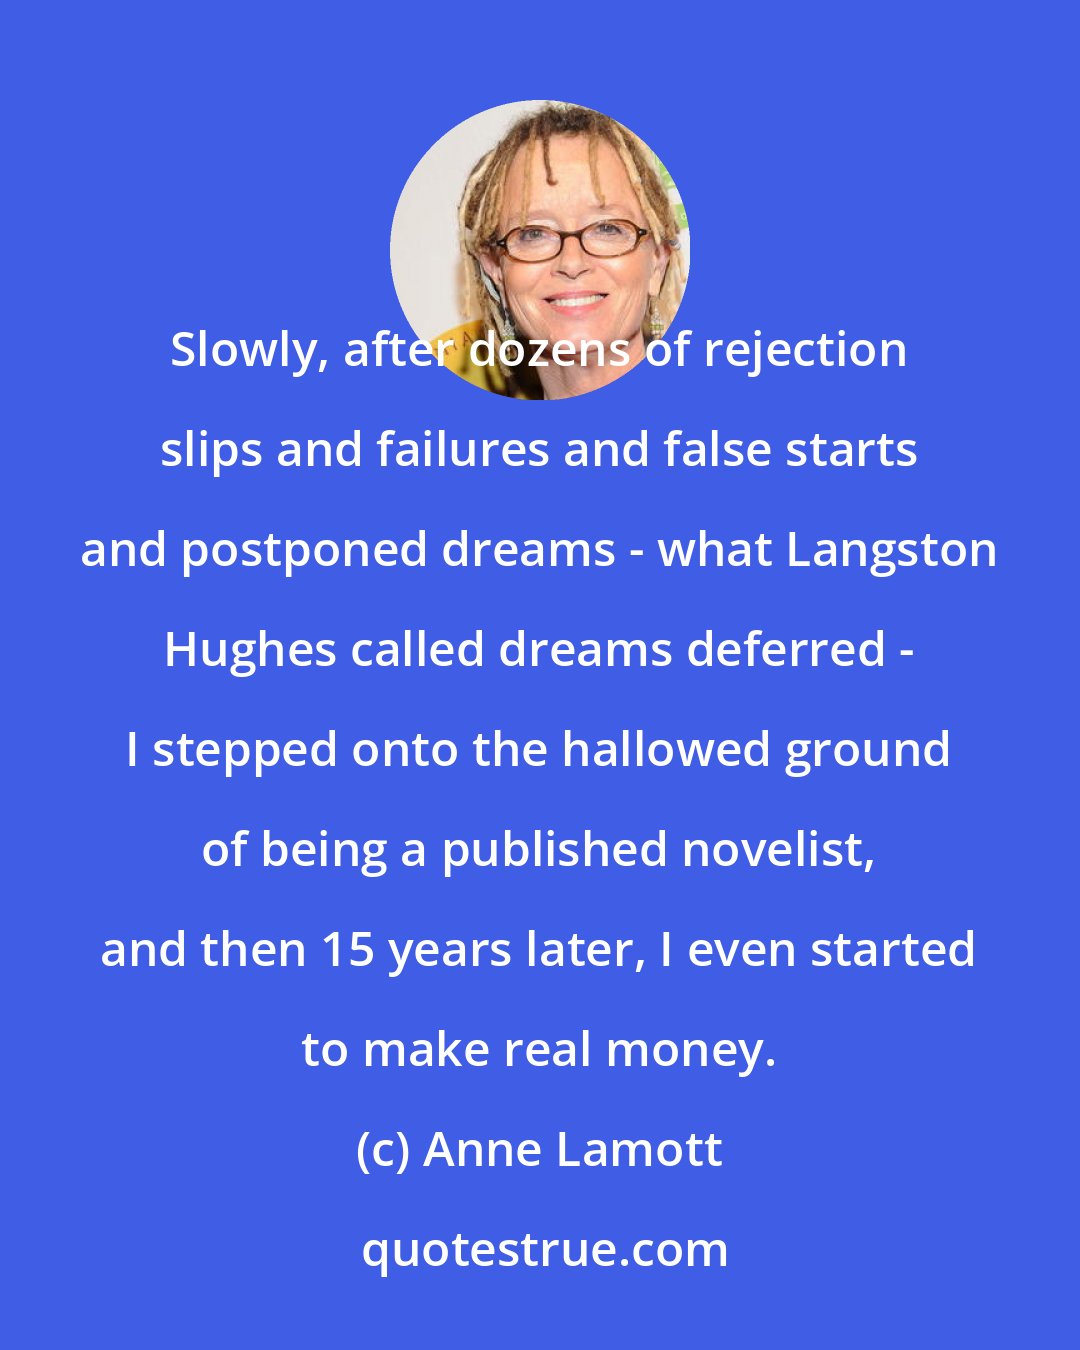 Anne Lamott: Slowly, after dozens of rejection slips and failures and false starts and postponed dreams - what Langston Hughes called dreams deferred - I stepped onto the hallowed ground of being a published novelist, and then 15 years later, I even started to make real money.